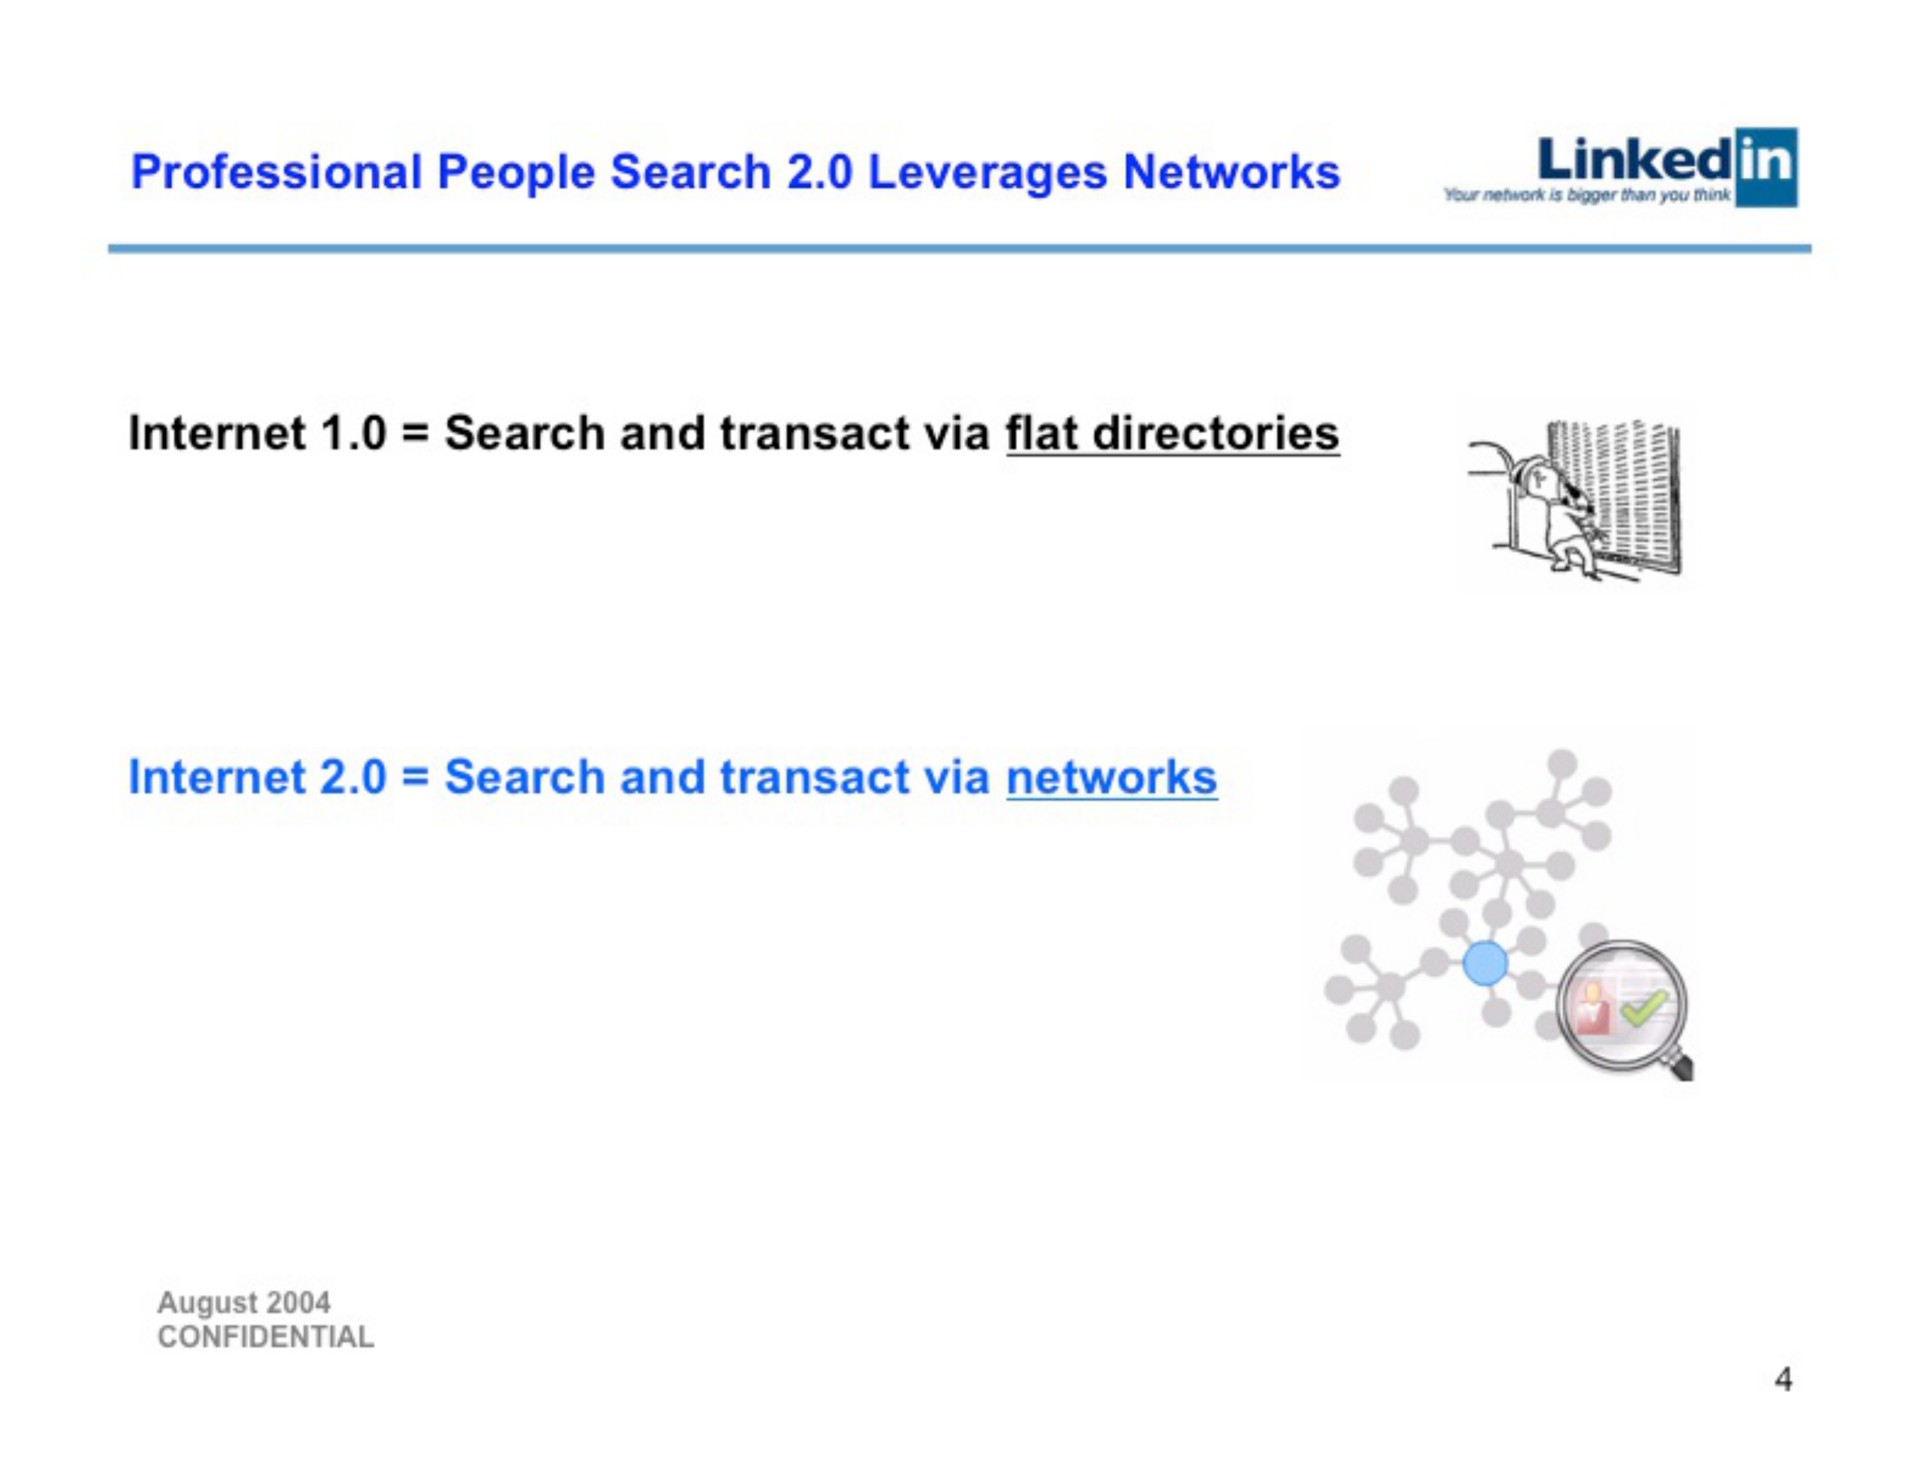 professional people search leverages networks search and transact via flat directories search and transact via networks | Linkedin